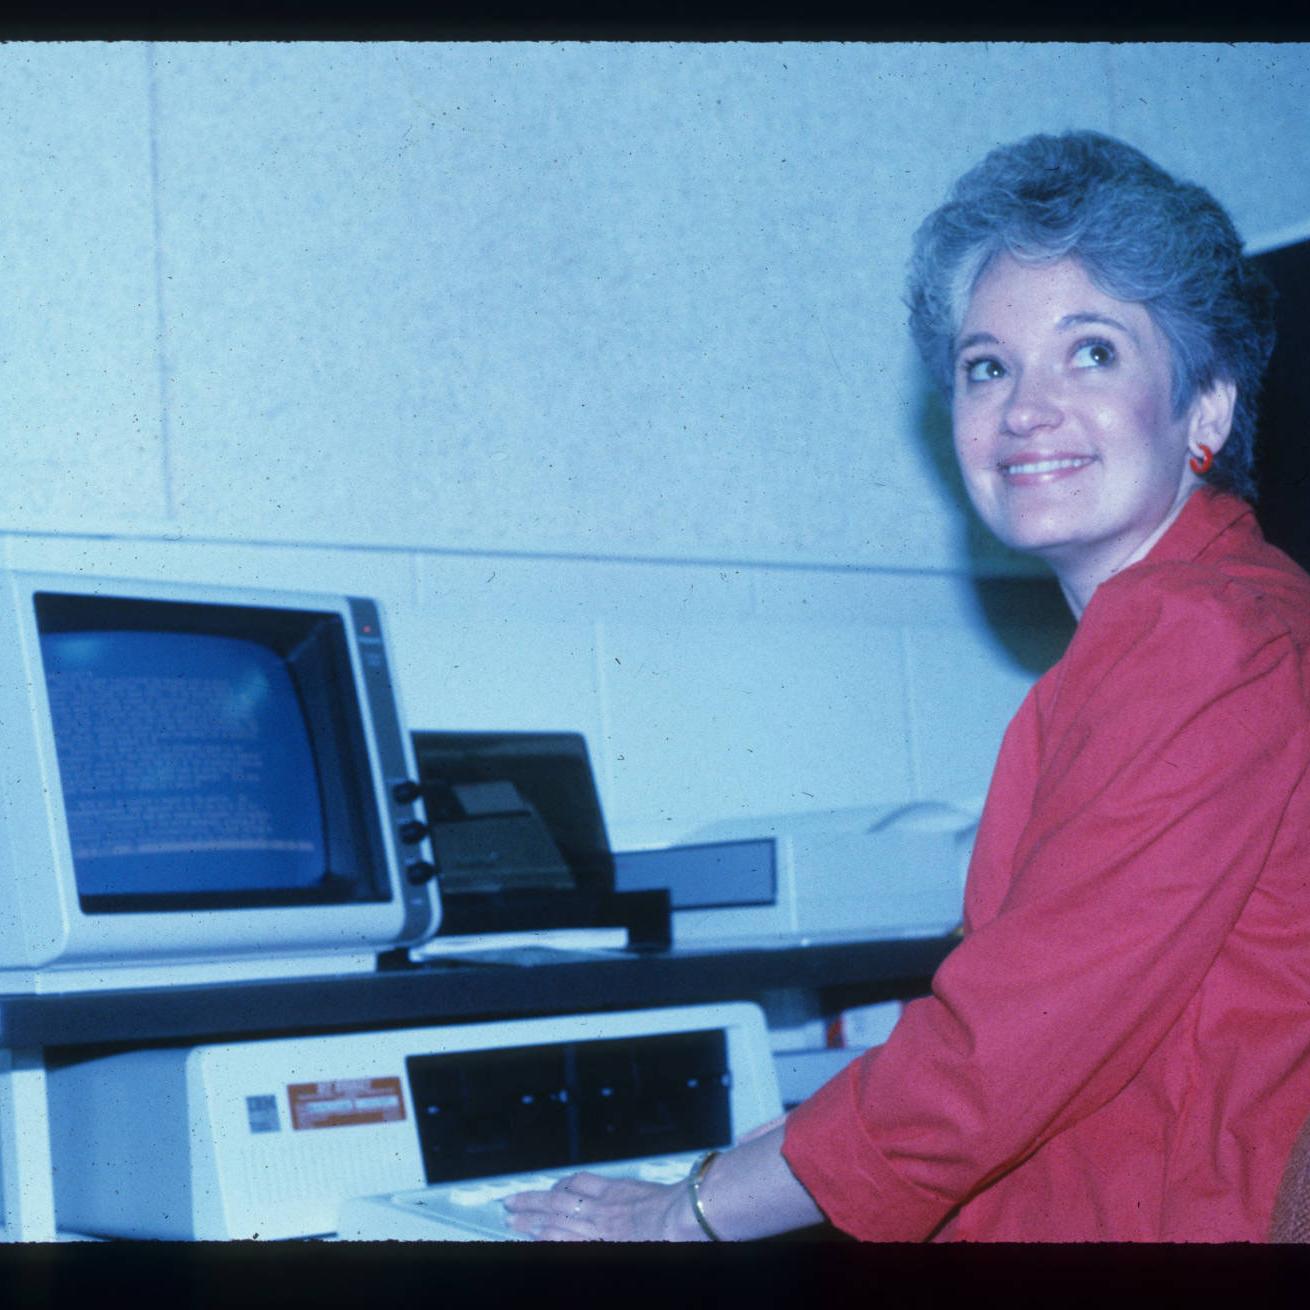 A photograph of former Minitex associate director Anita Branin sitting in front of the computer.